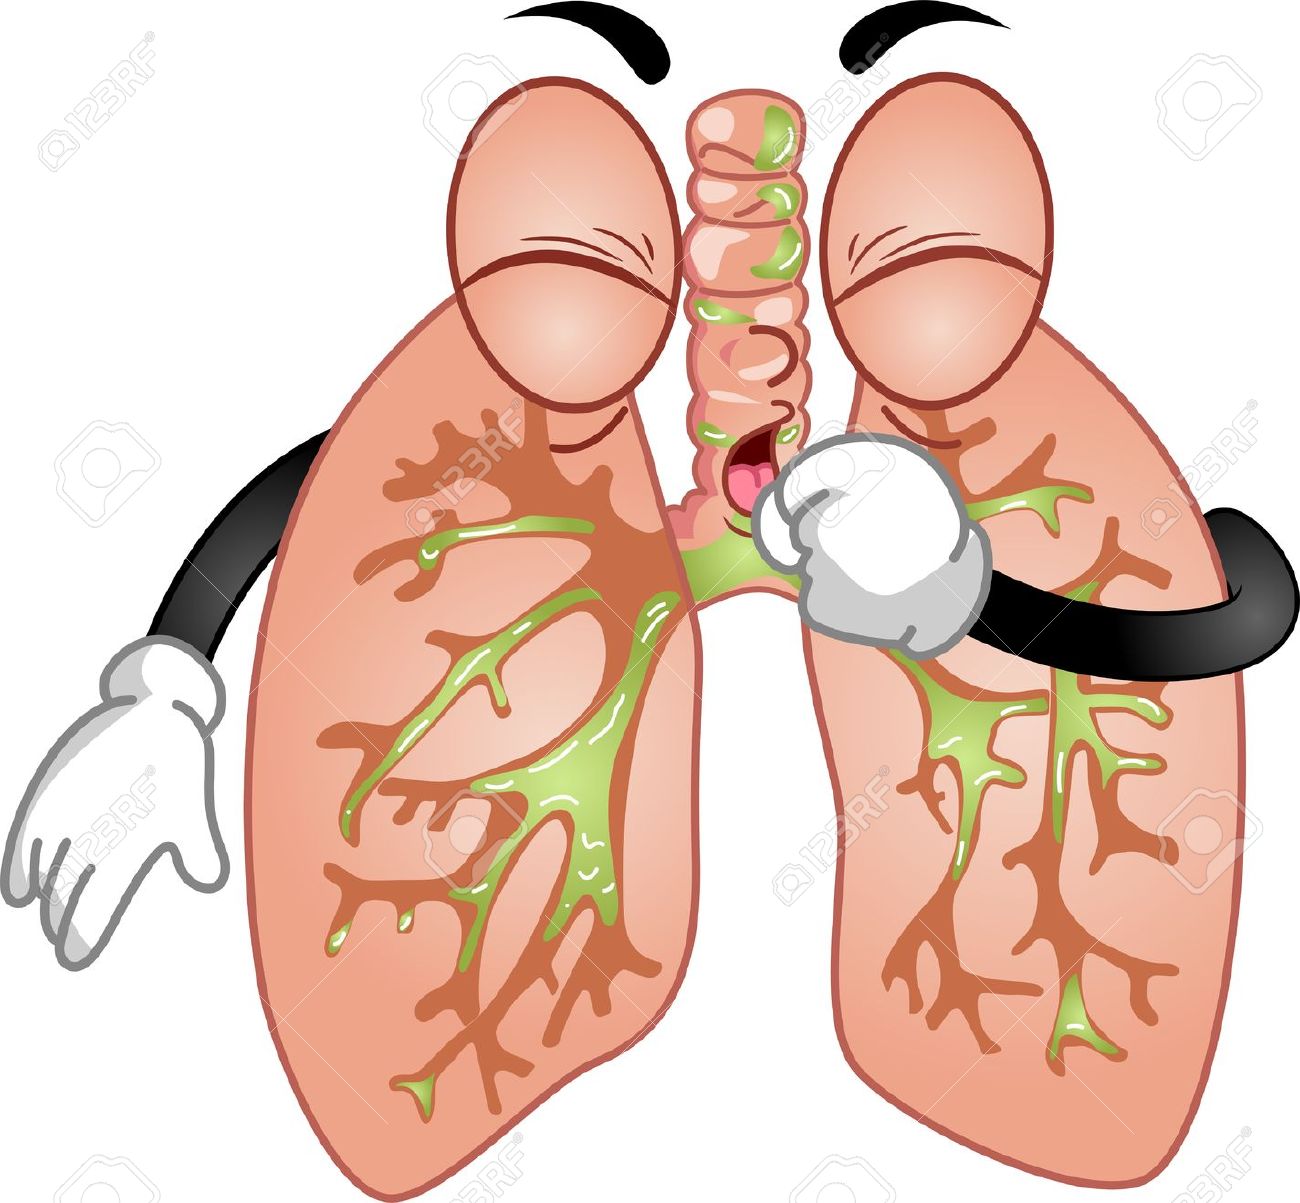 Lung clipart free - ClipartFest